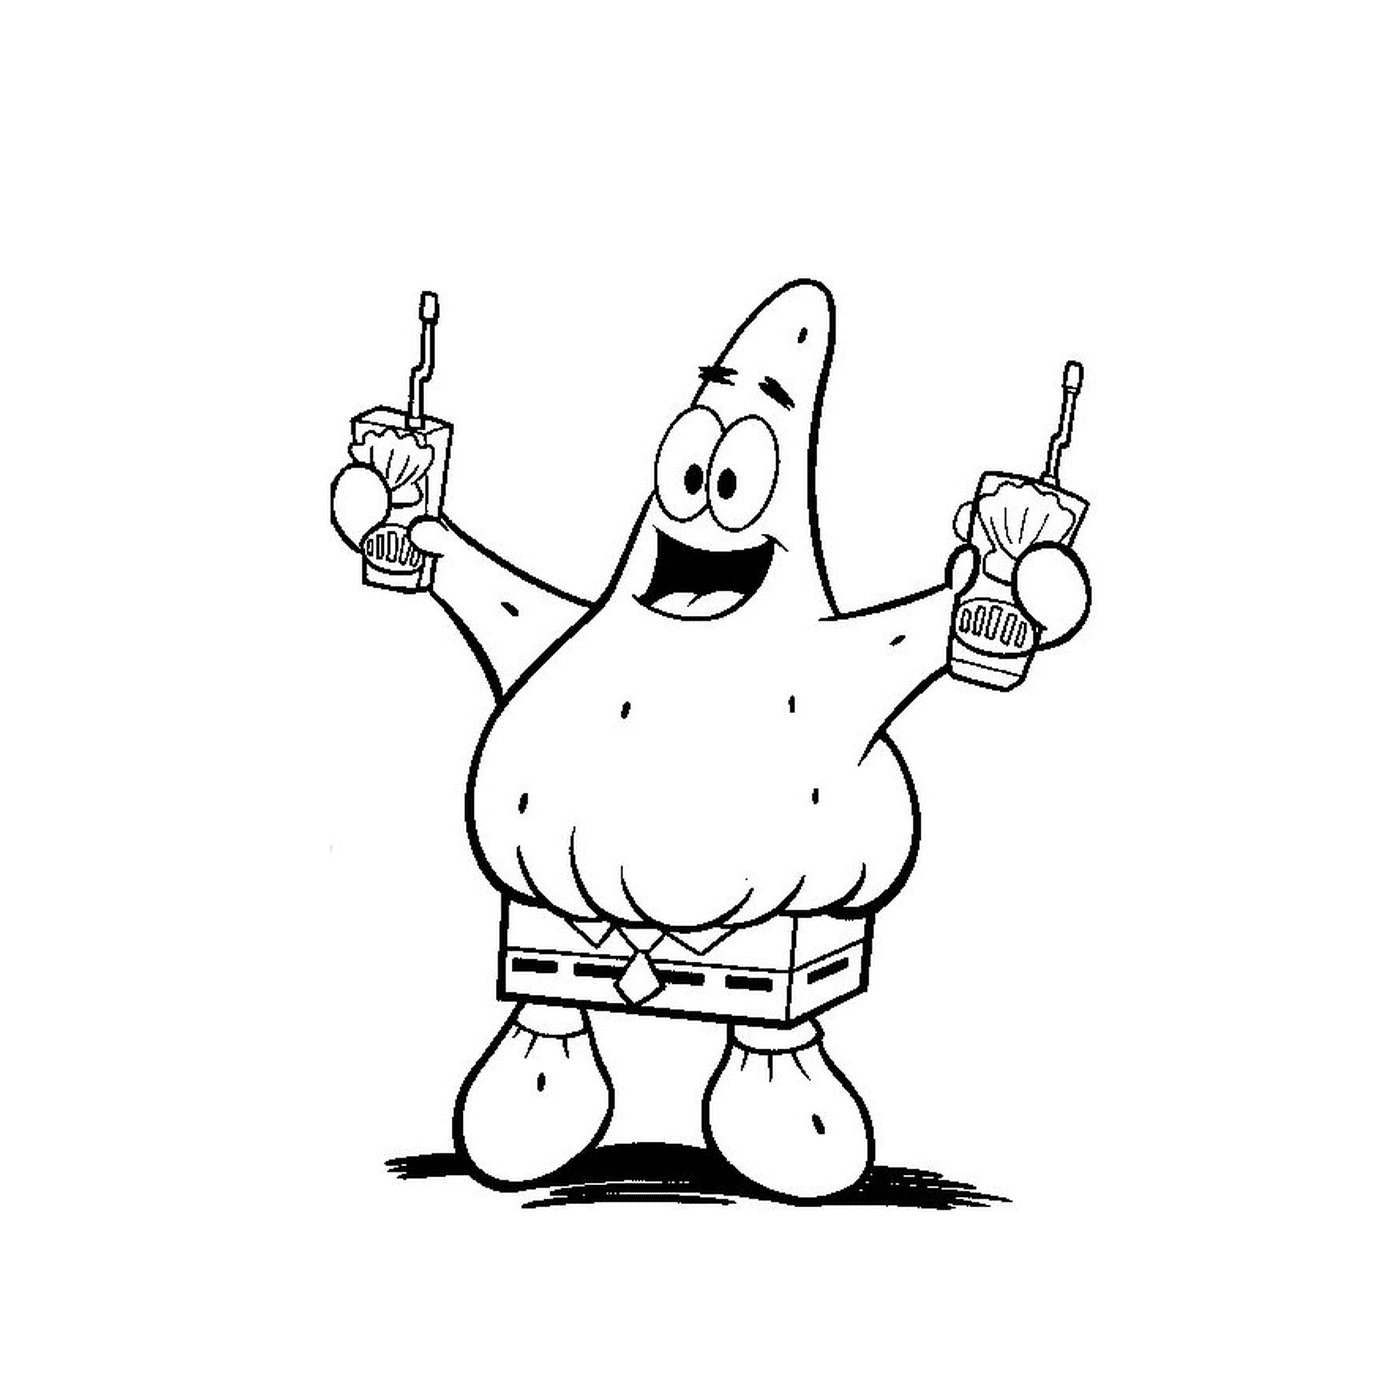  Patrick the star of the sea with a person holding mobile phones 